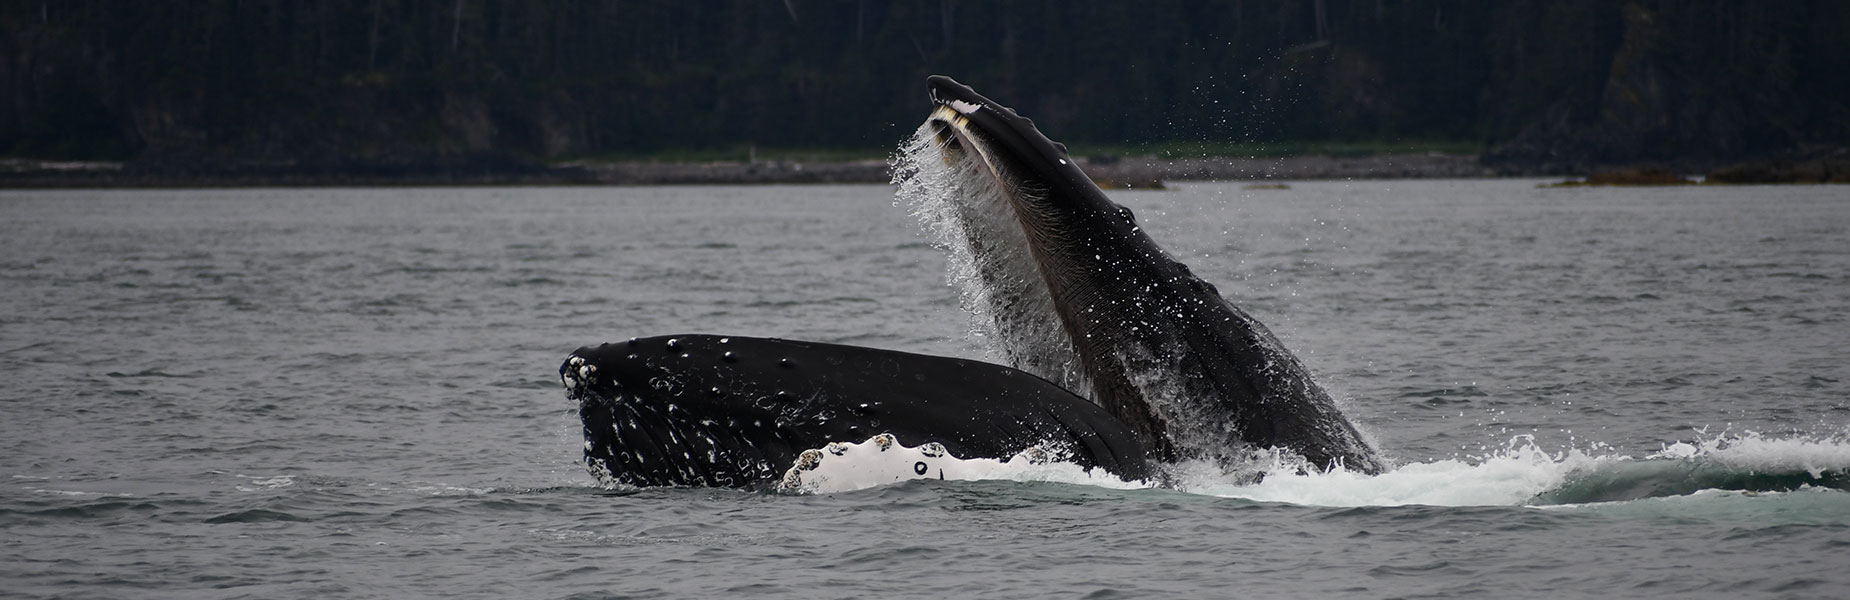 Captain Josh invites you to join him for a thrilling whale watching tour in Hoonah, Alaska.